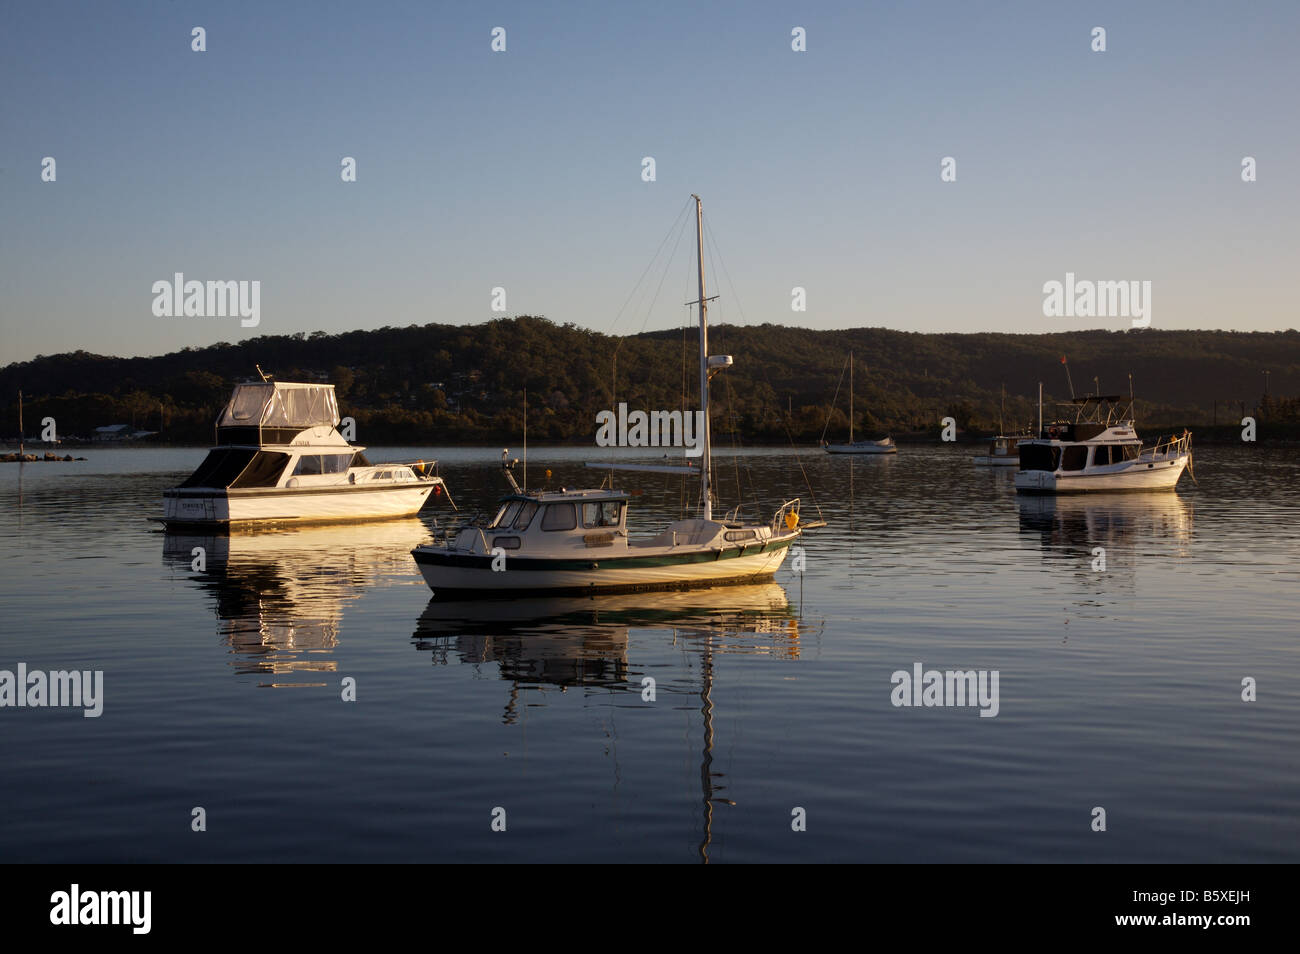 Boats moored on Brisbane Water, looking across the bay from Gosford to Tascot, NSW Australia Stock Photo